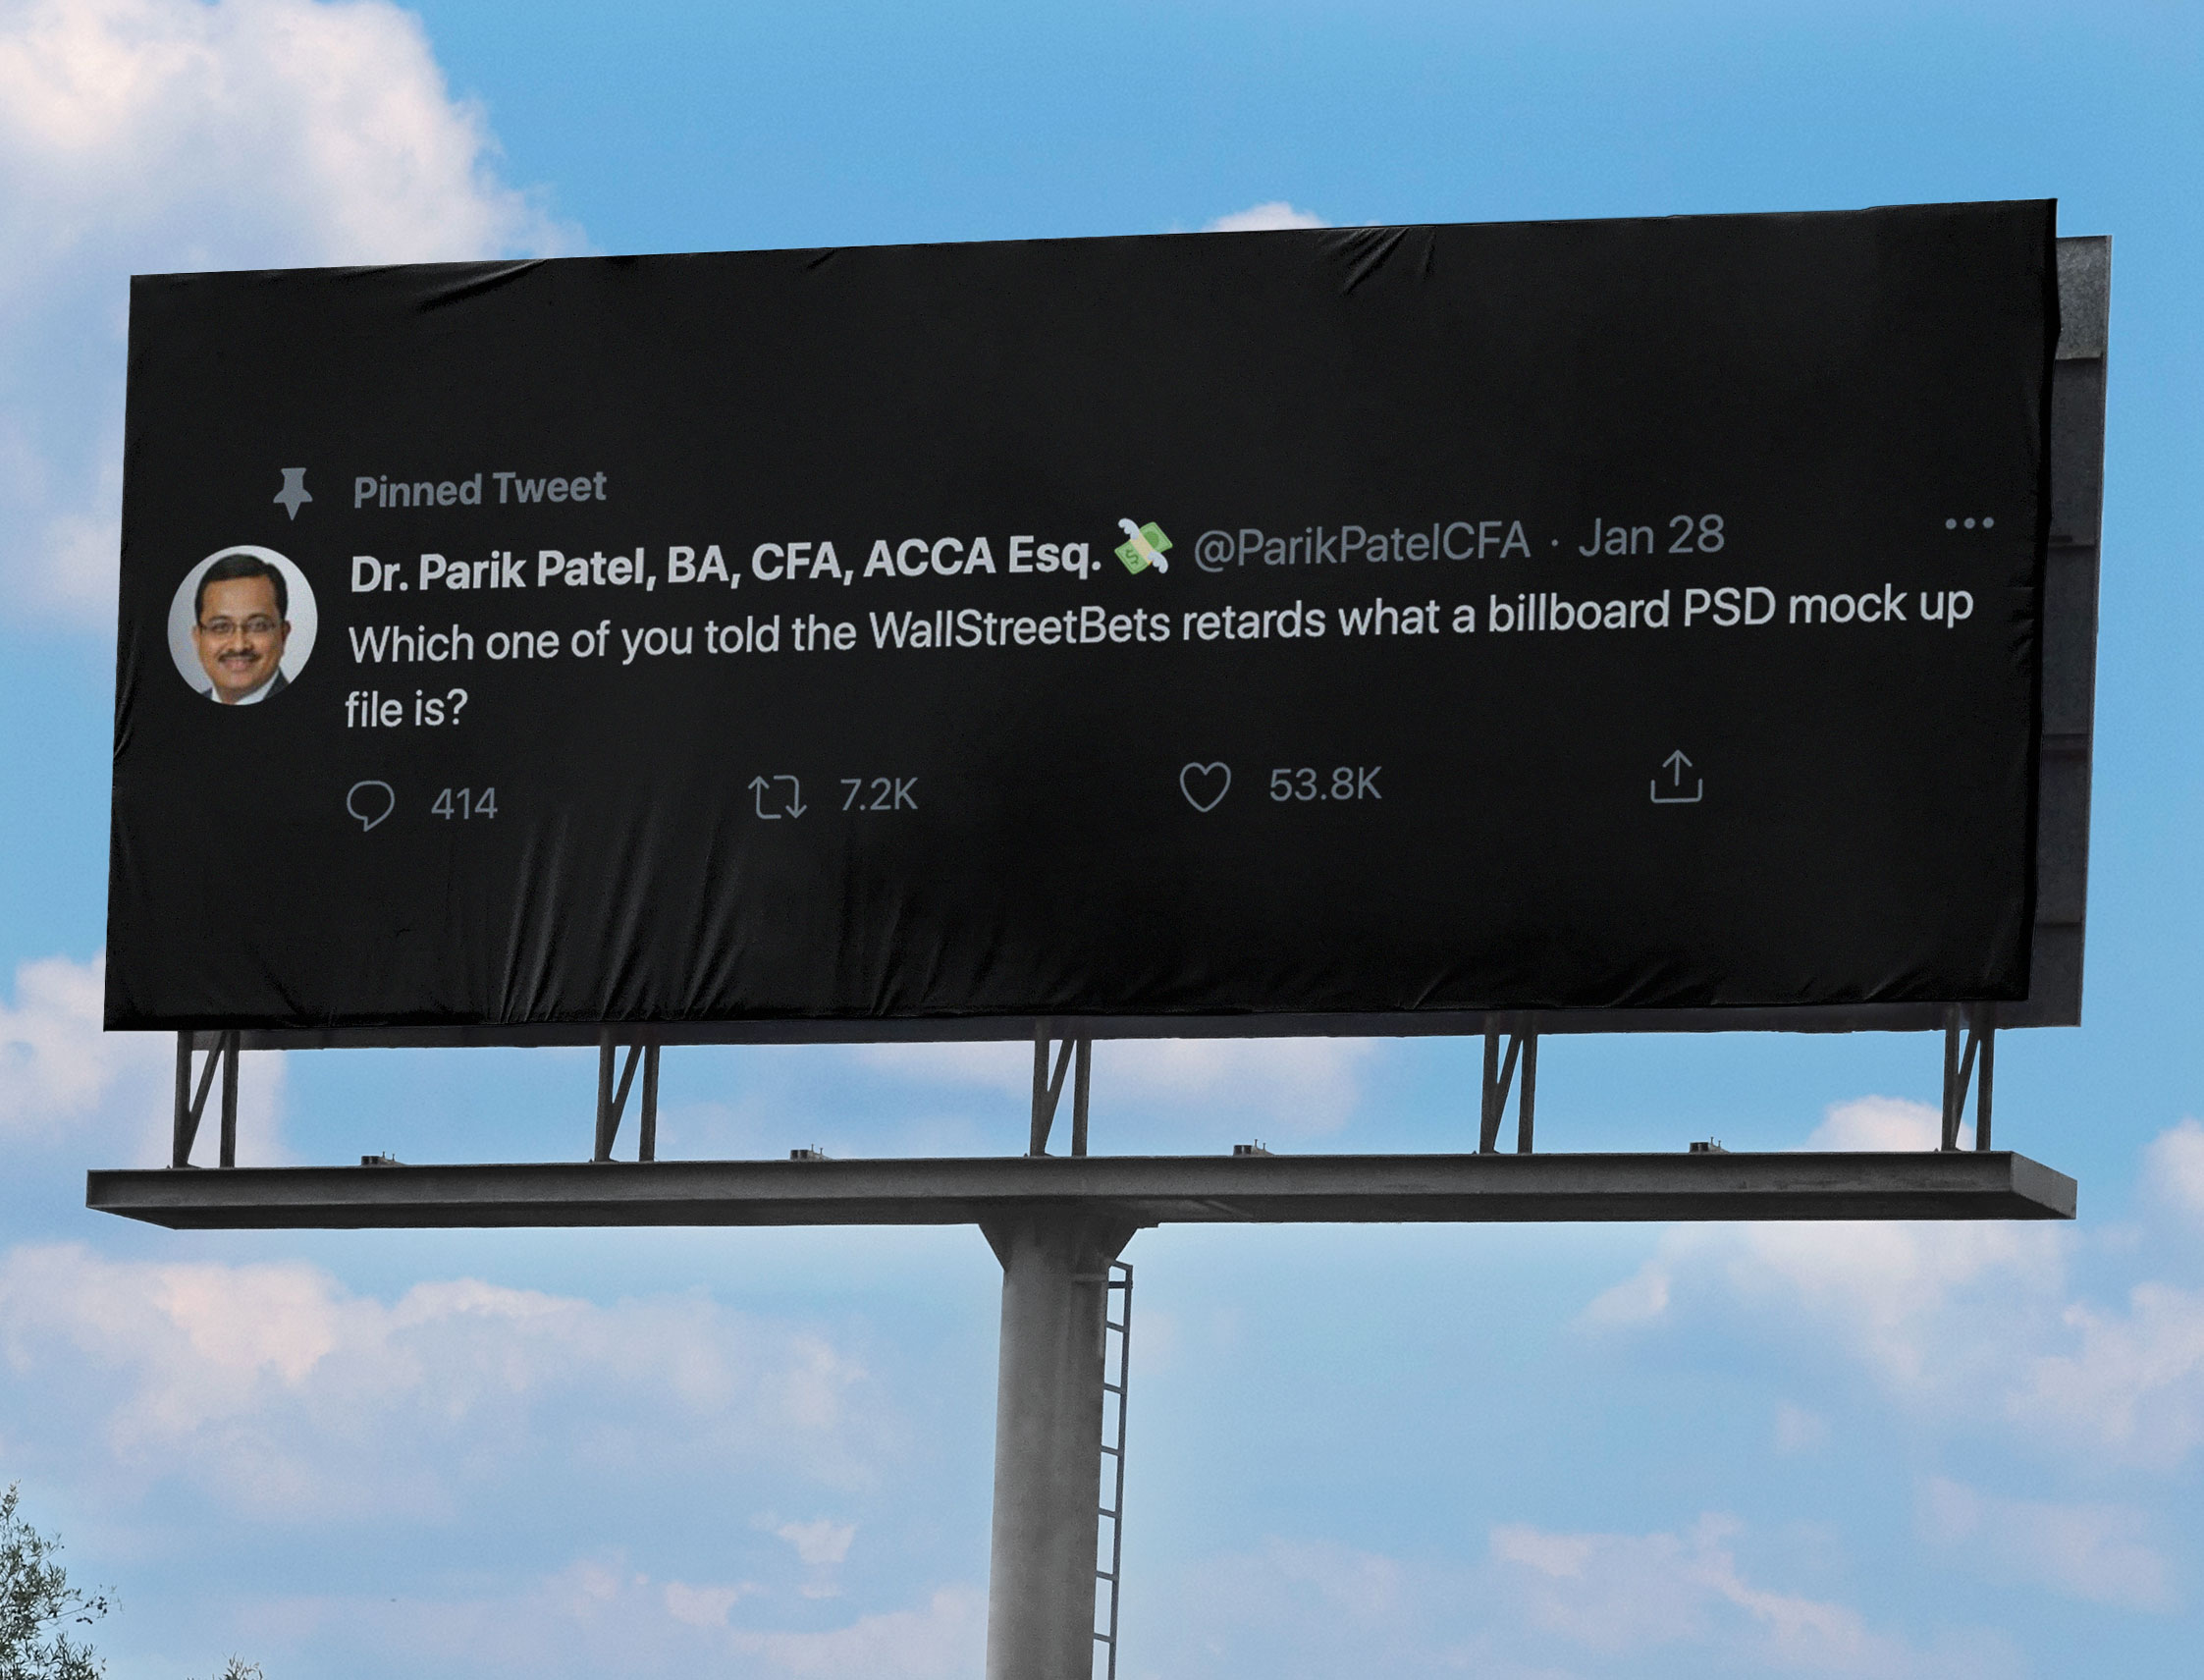 billboard - Pinned Tweet Dr. Parik Patel, Ba, Cfa, Acca Esq. Jan 28 Which one of you told the Wall StreetBets retards what a billboard Psd mock up file is? 414 22